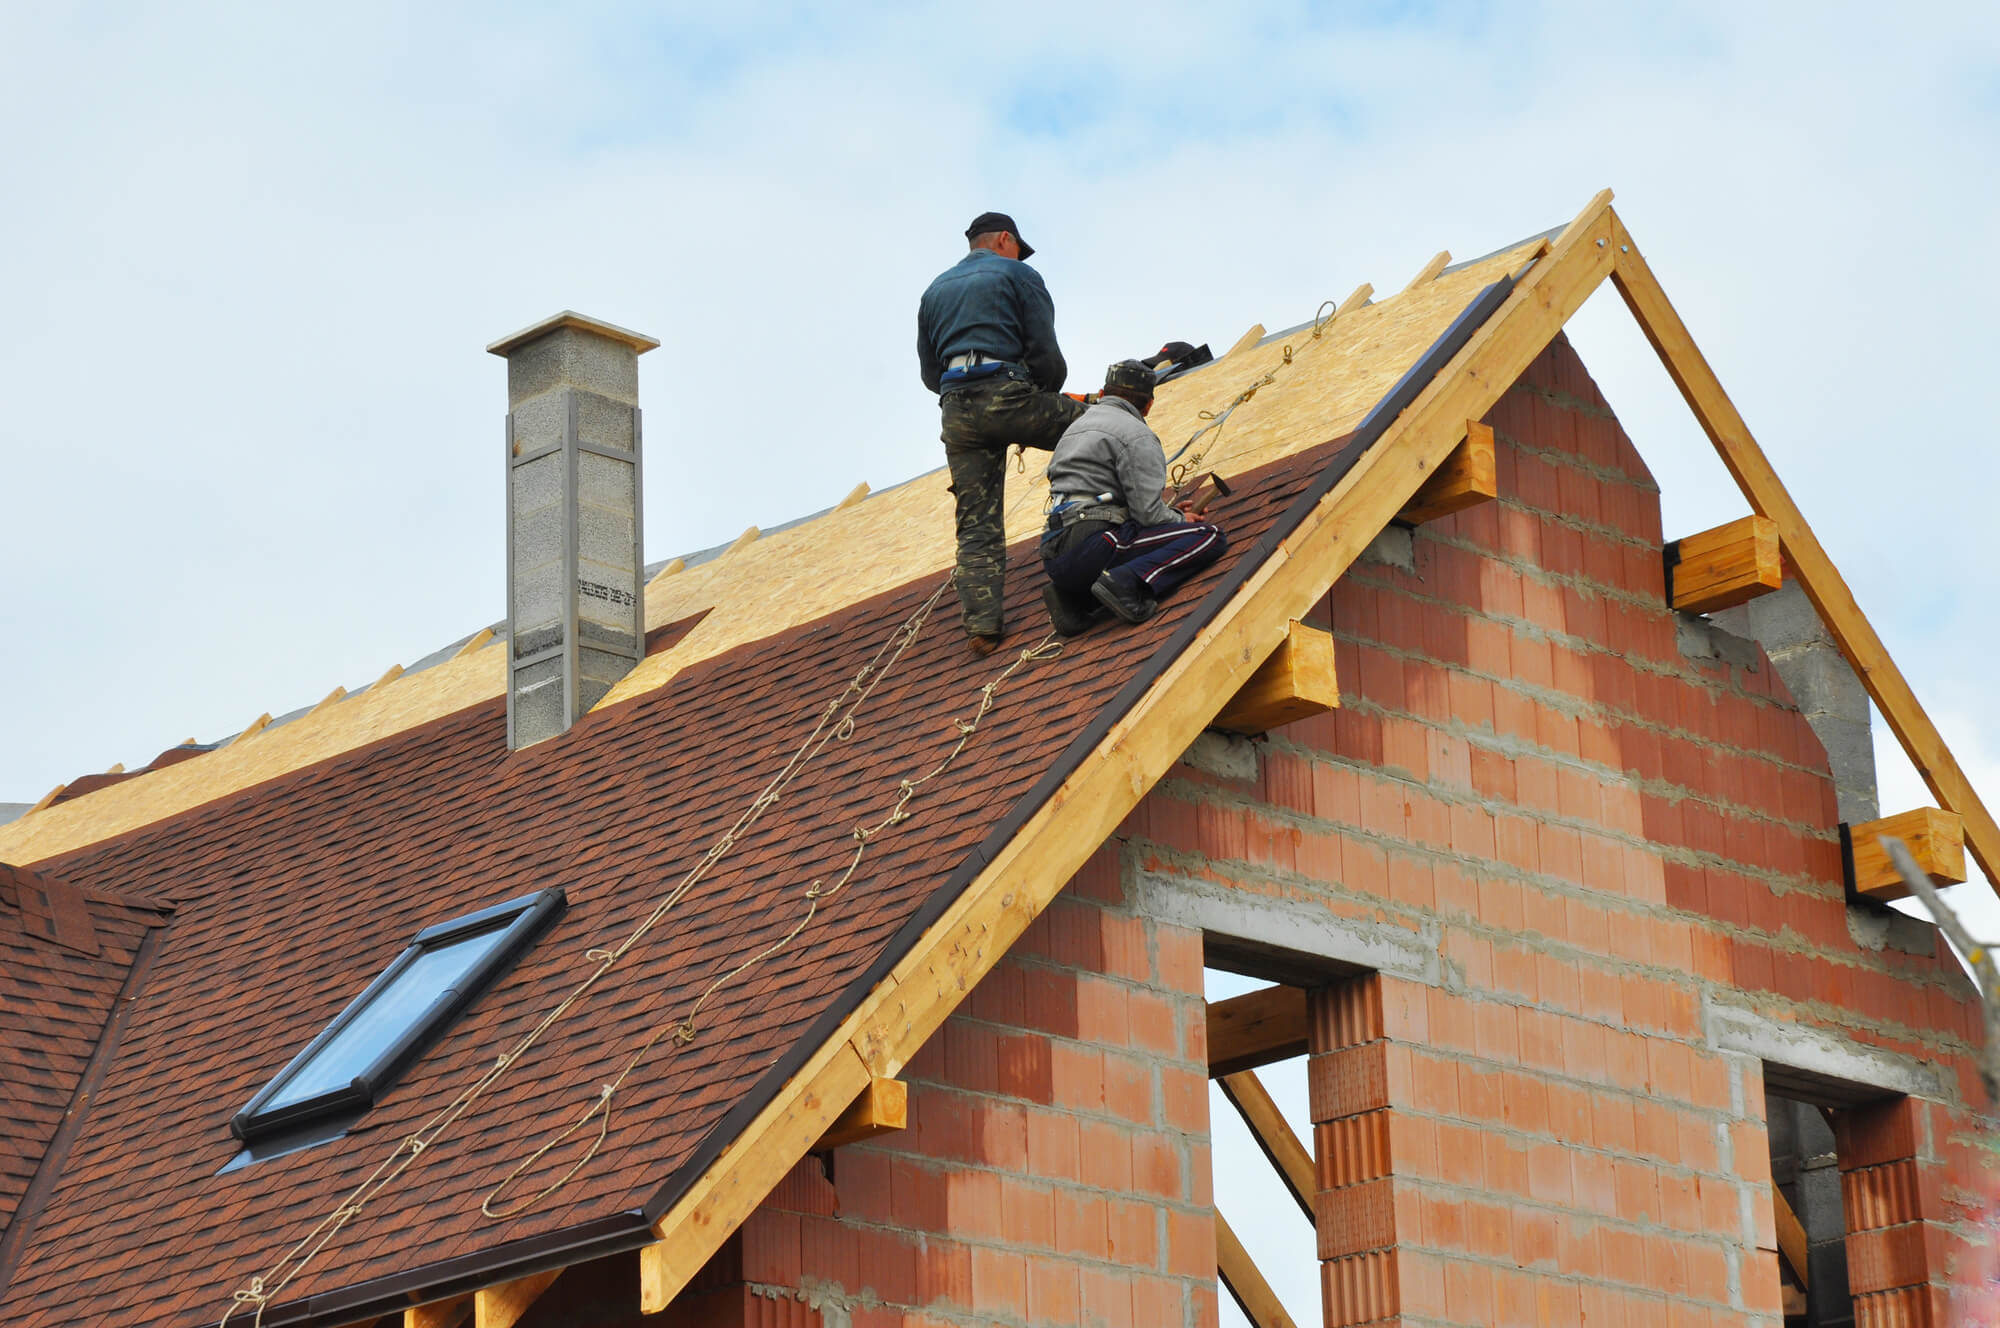 5 Ways To Get Roofing Leads and Turn Them Into Roofing Sales